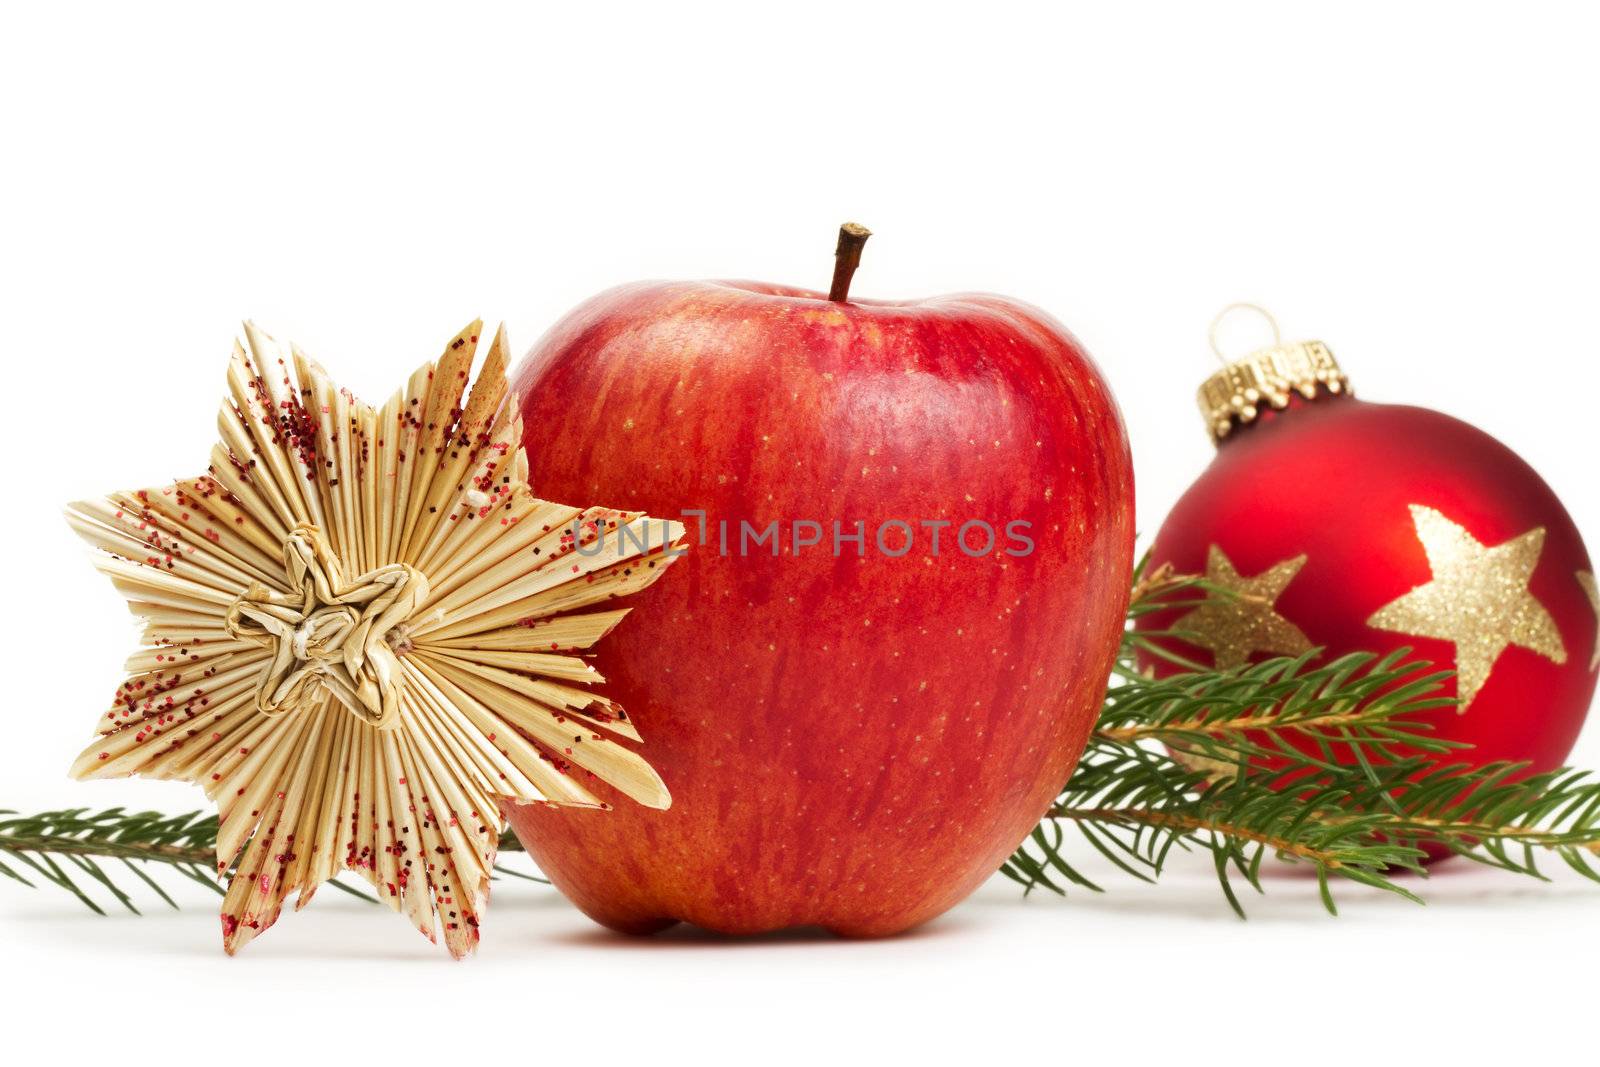 red apple, a straw star and a red christmas bauble in background with a branch on white background